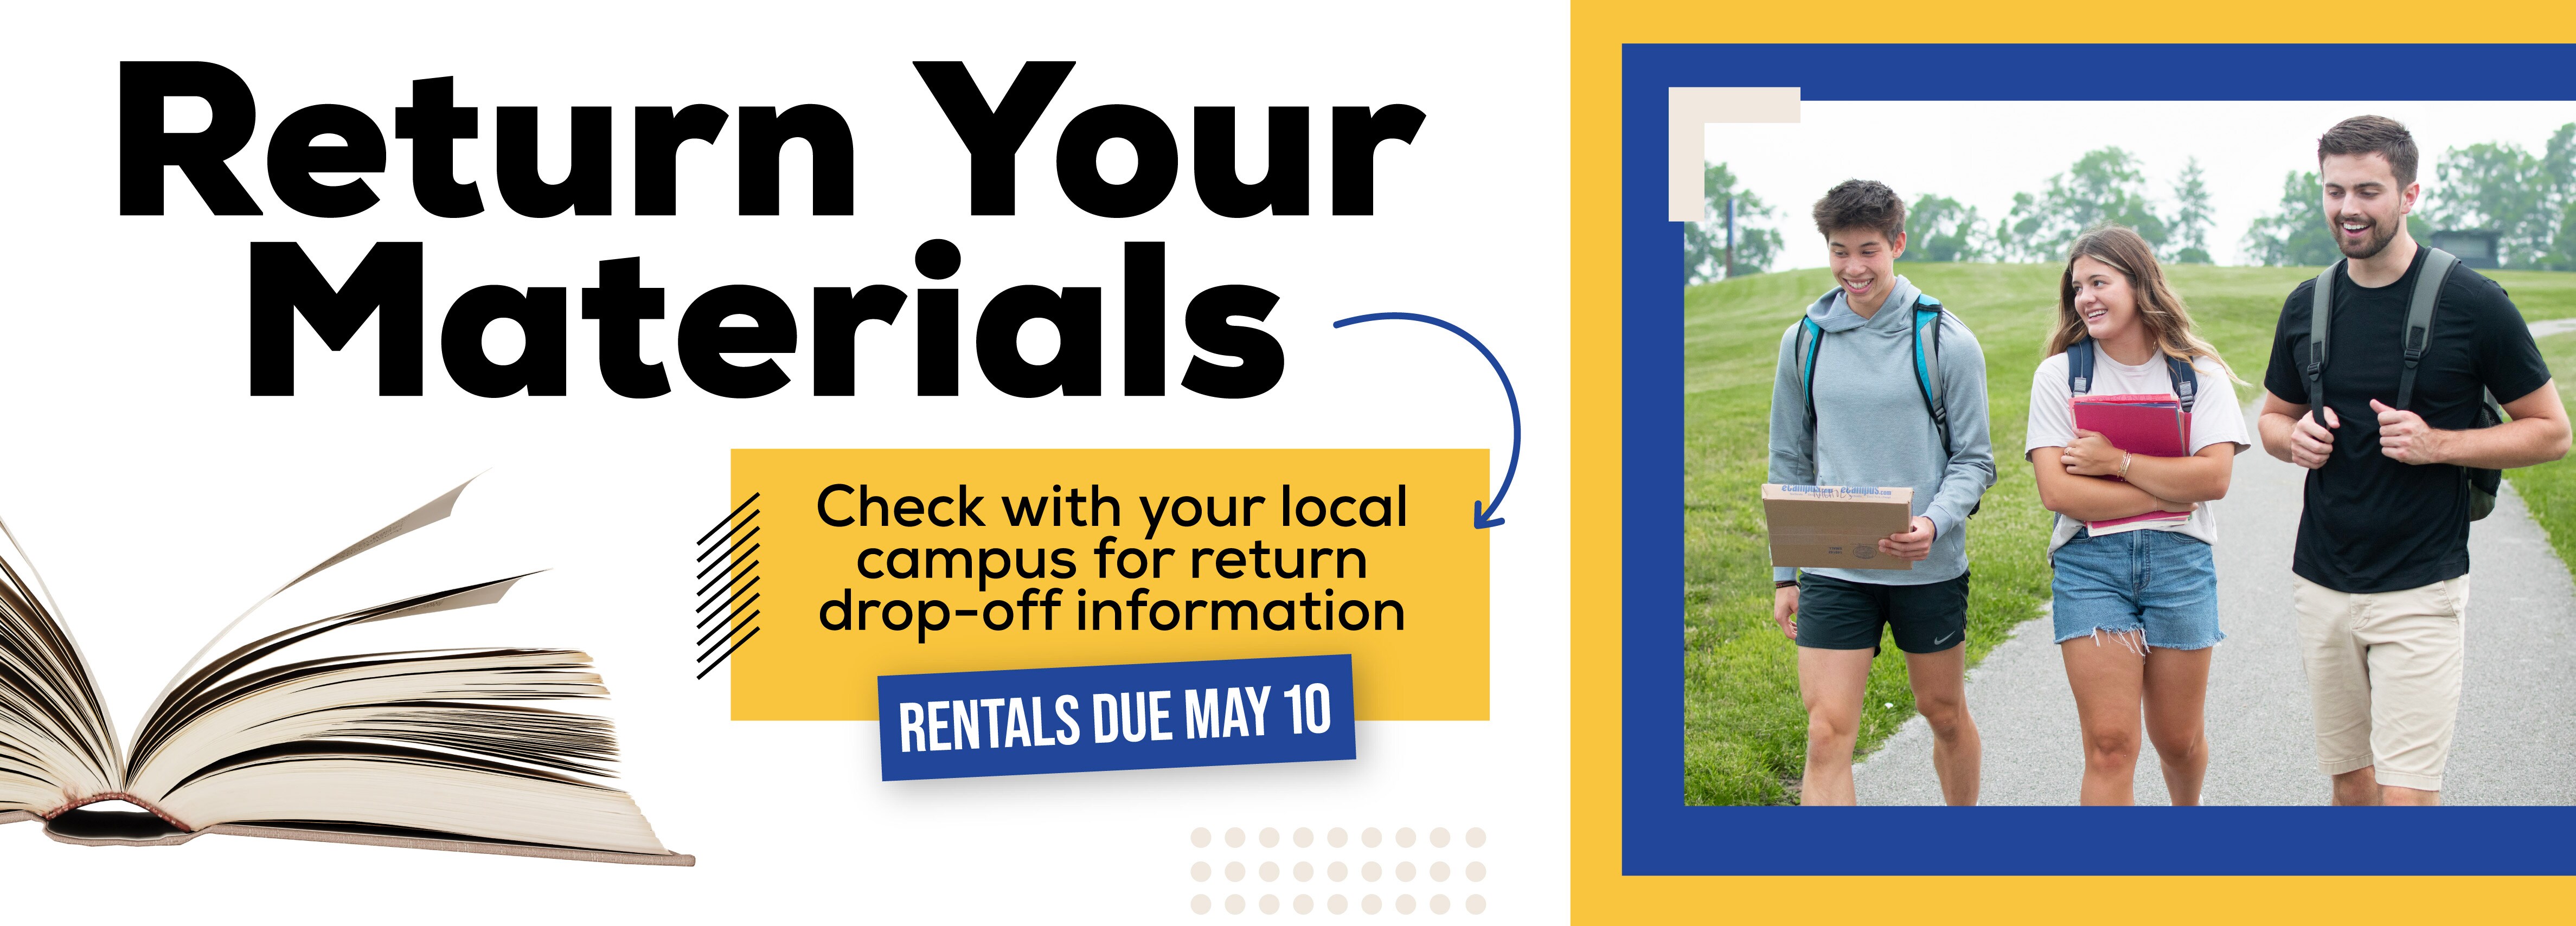 Return Your Materials Check with your local campus for return drop-off information  Rentals Due May 10